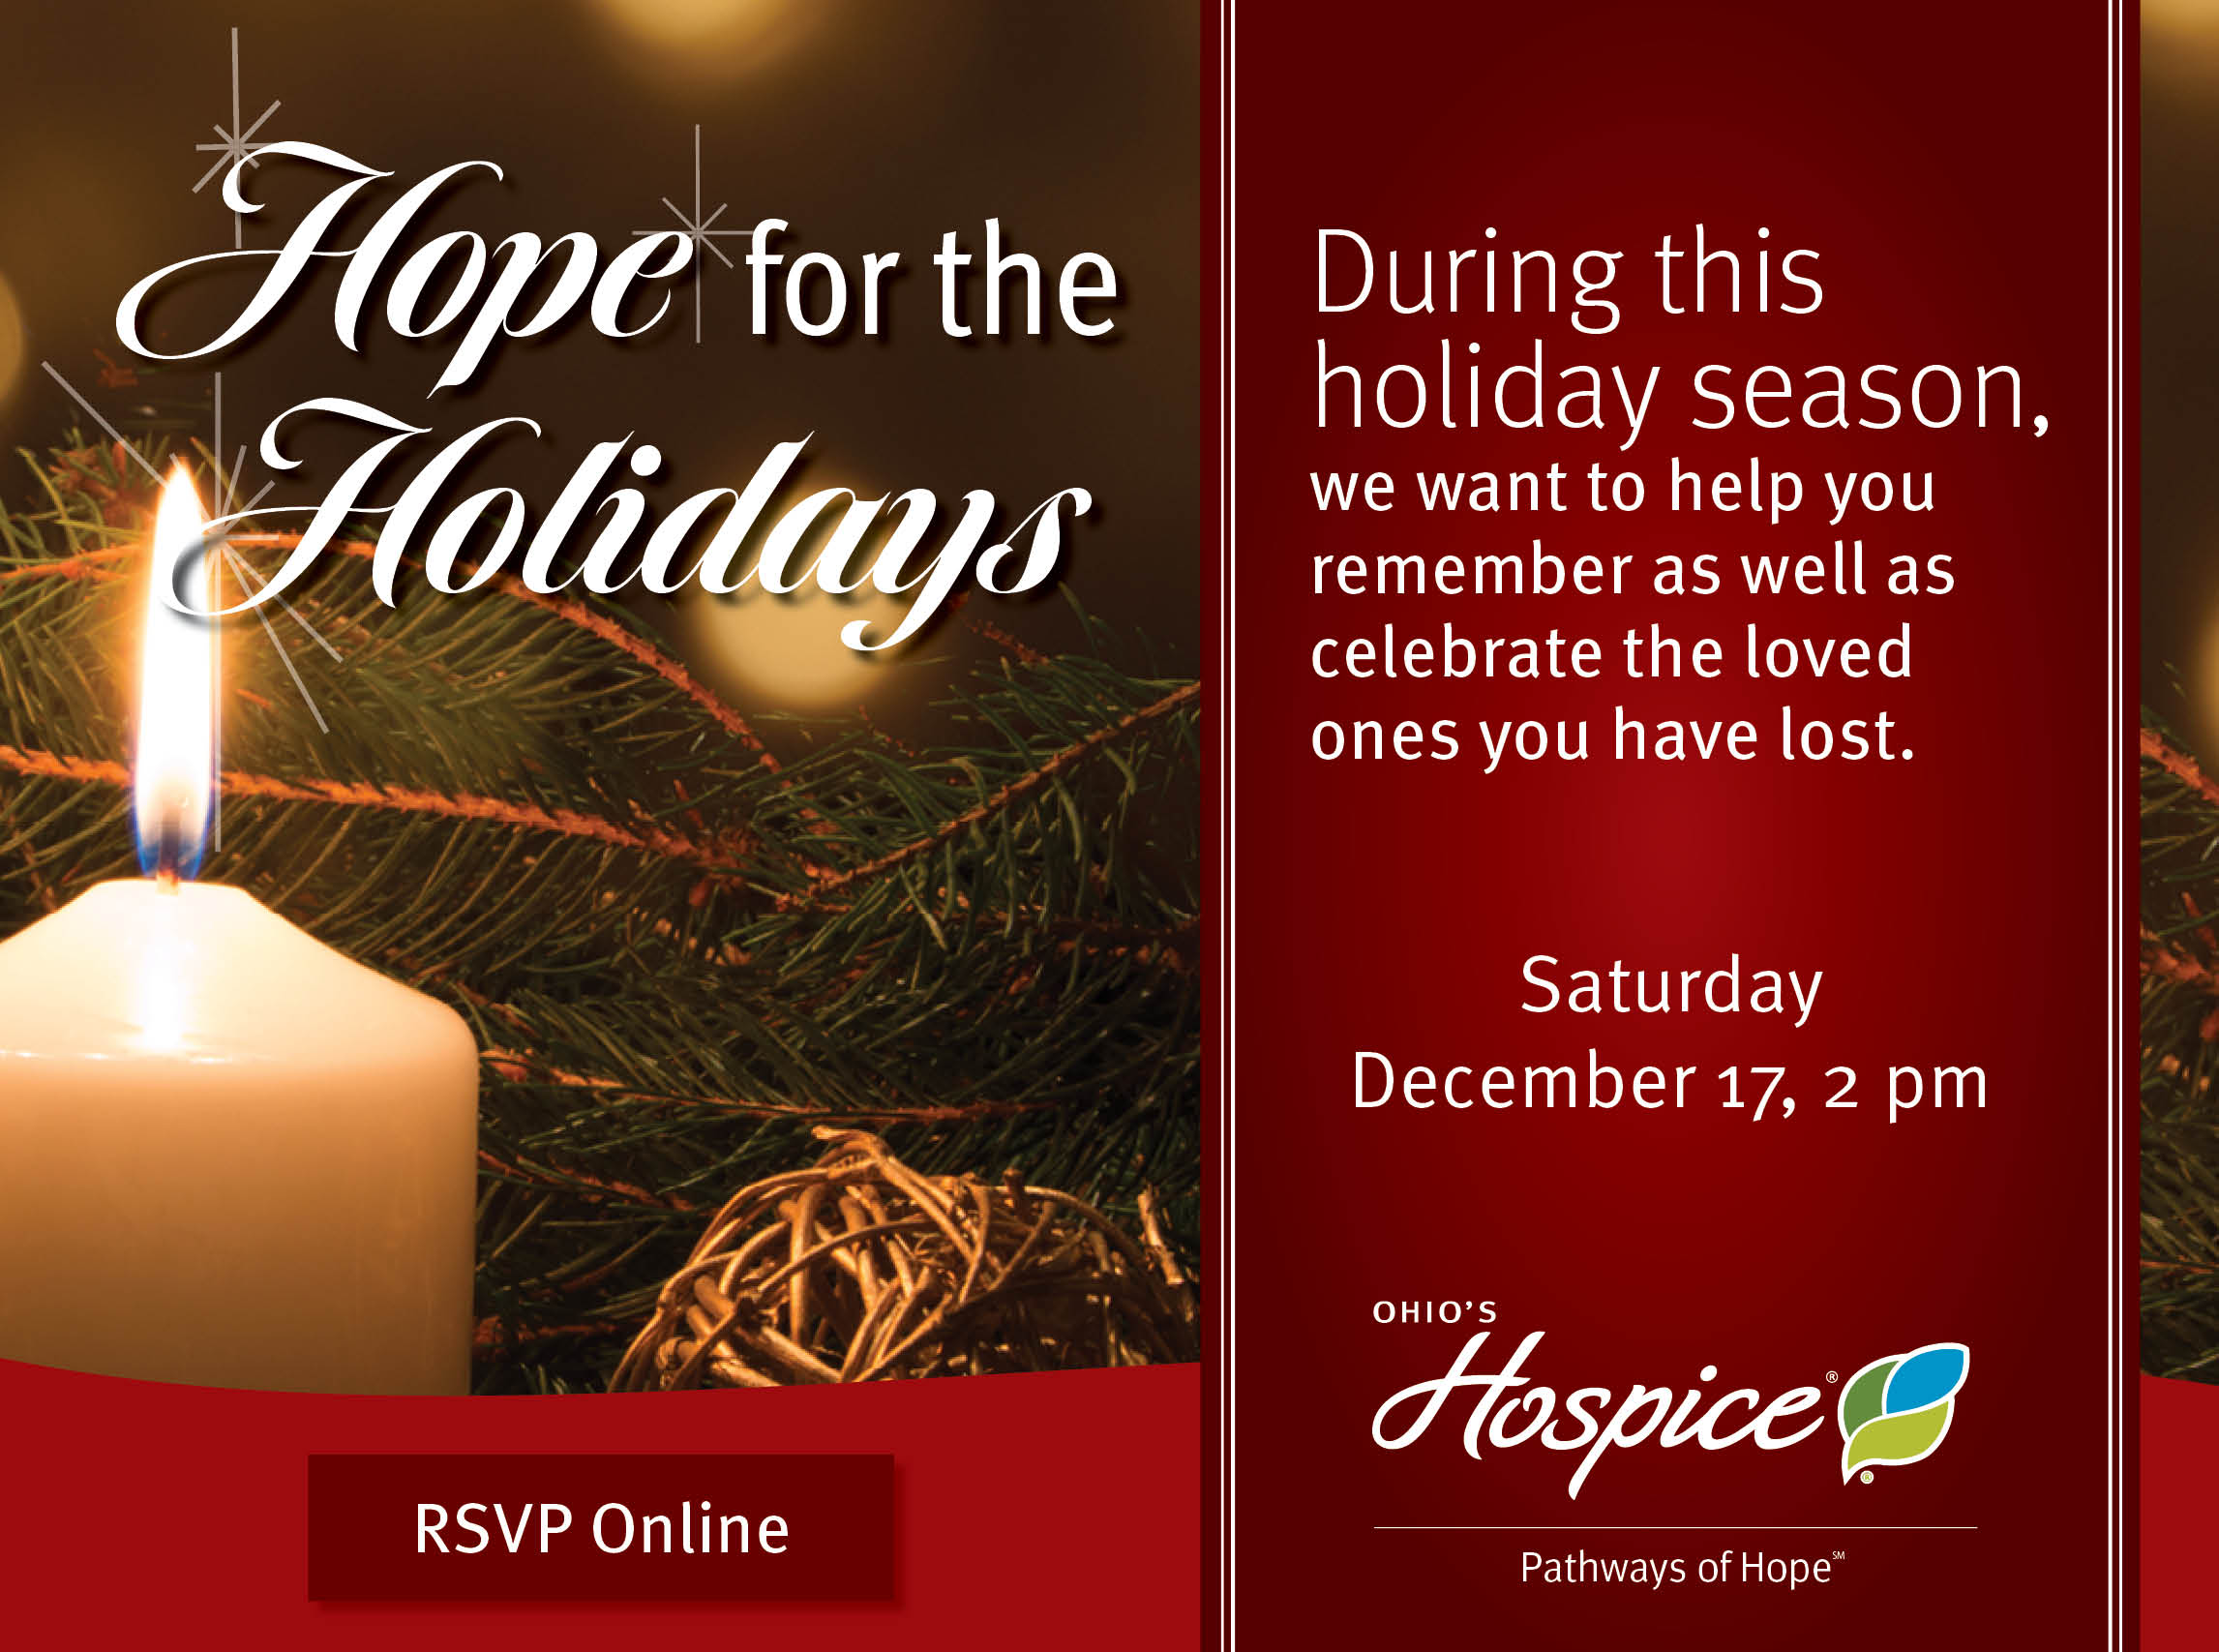 Hope for the Holidays: During this holiday season, we want to help you remember as well as celebrate the loved ones you have lost.